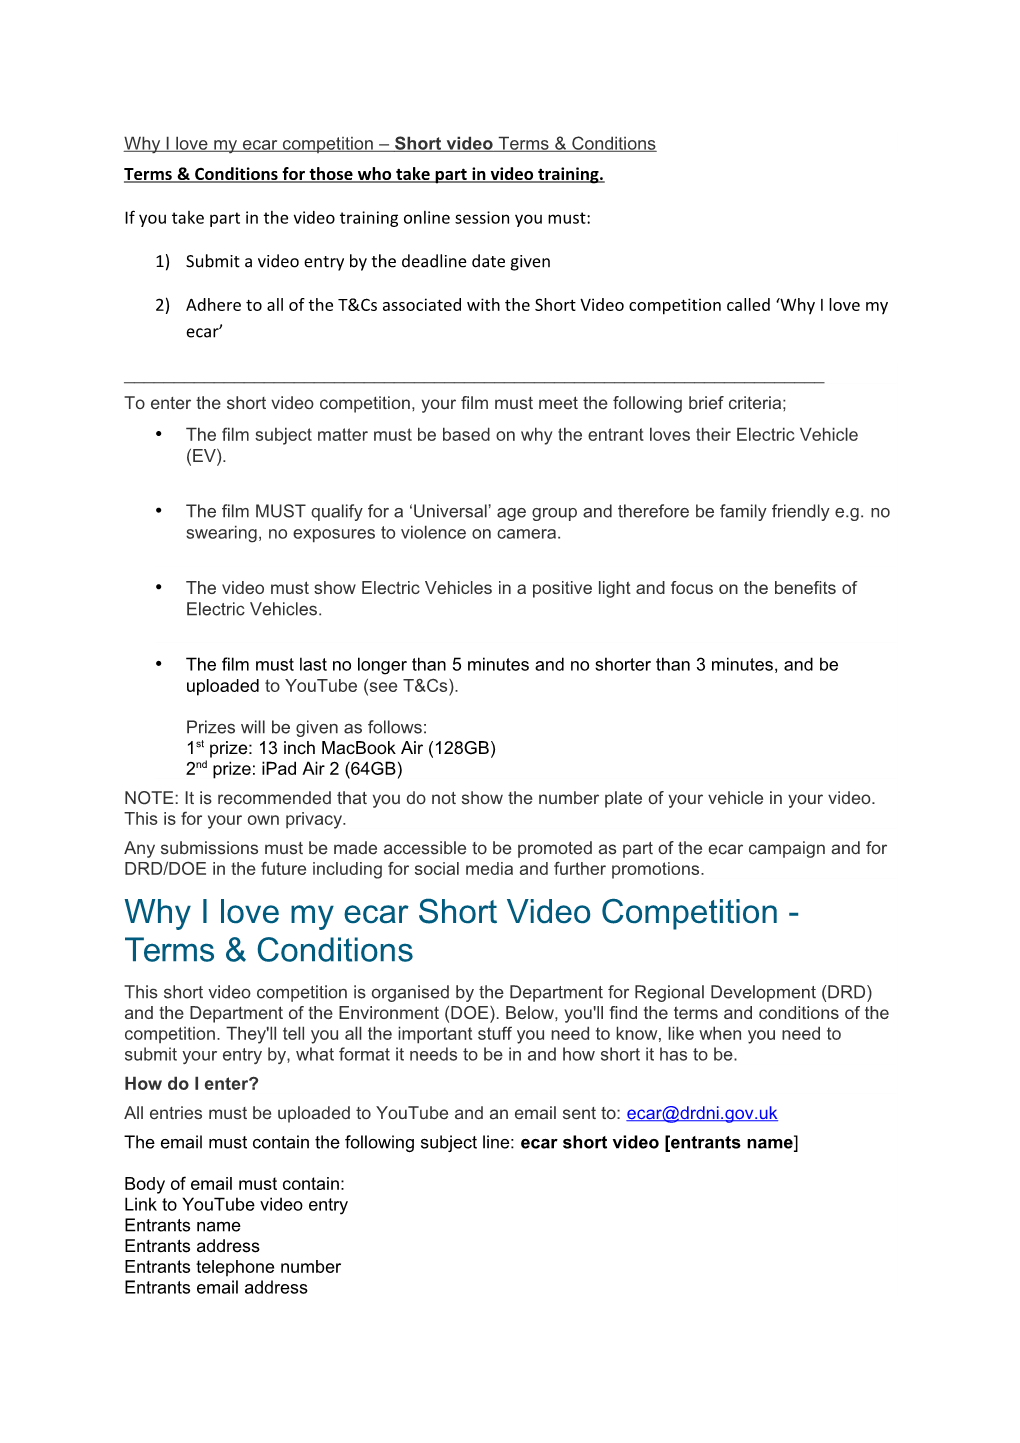 Terms & Conditions for Those Who Take Part in Video Training